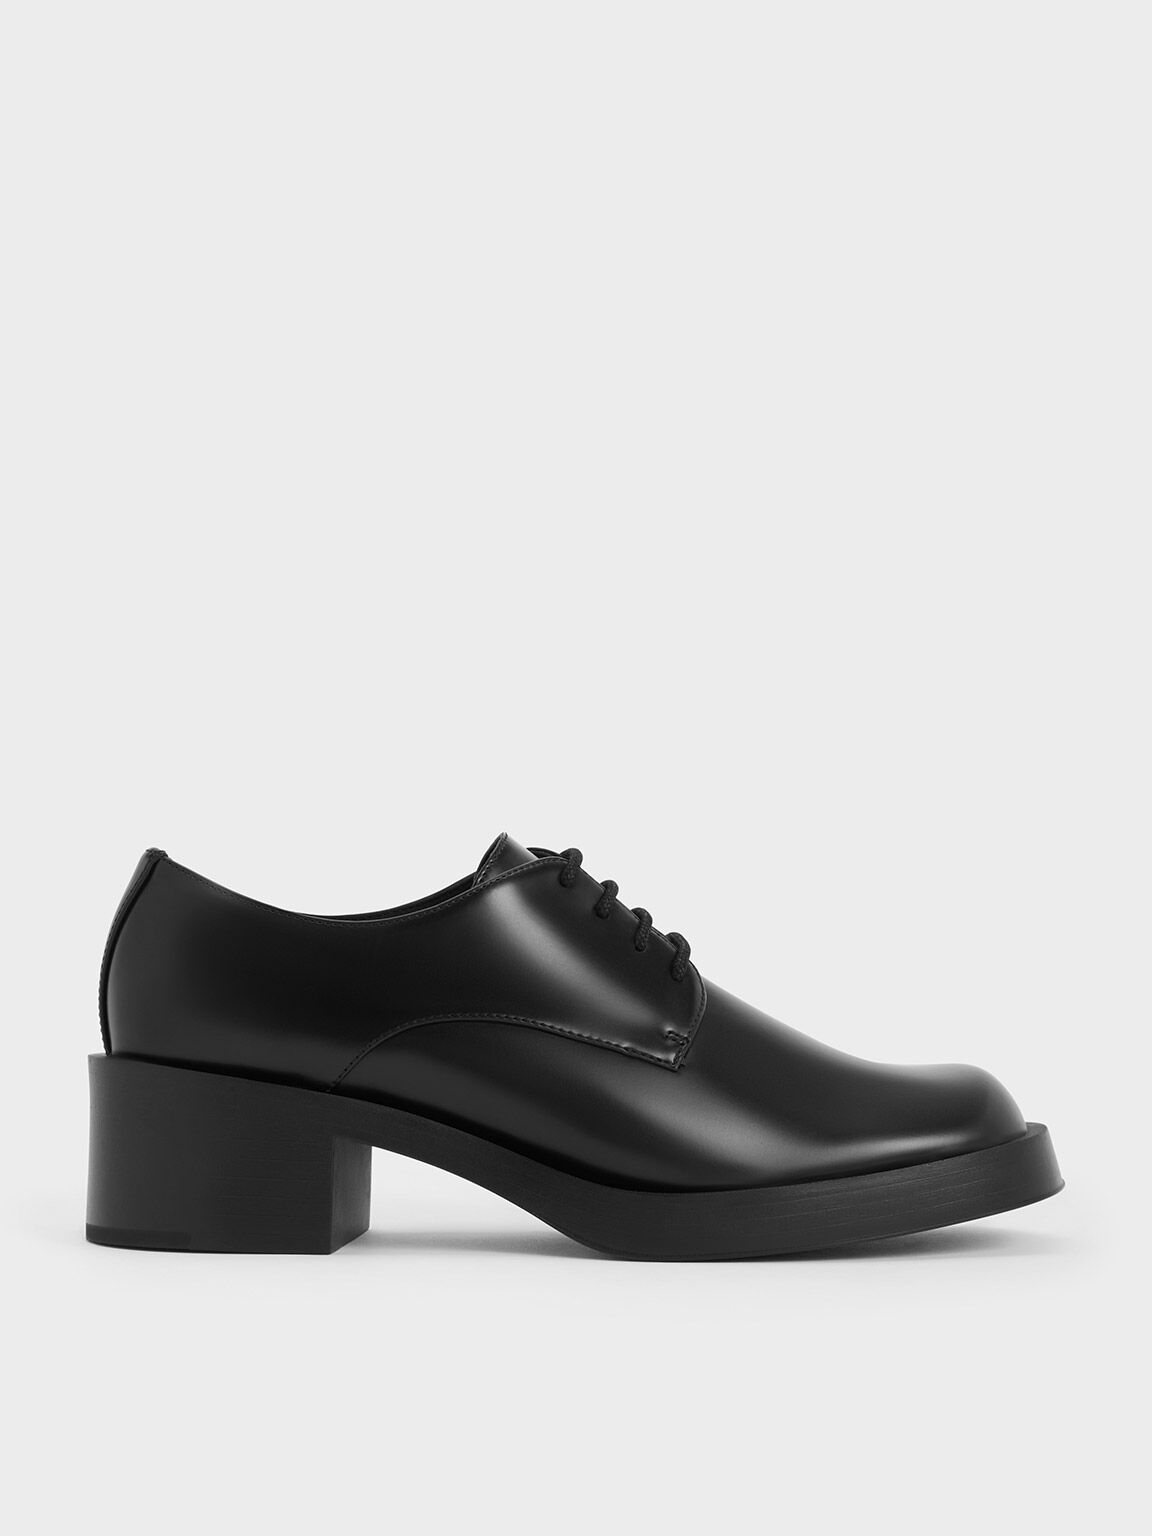 Black Boxed Block Heel Lace-Up Oxfords - CHARLES & KEITH TH